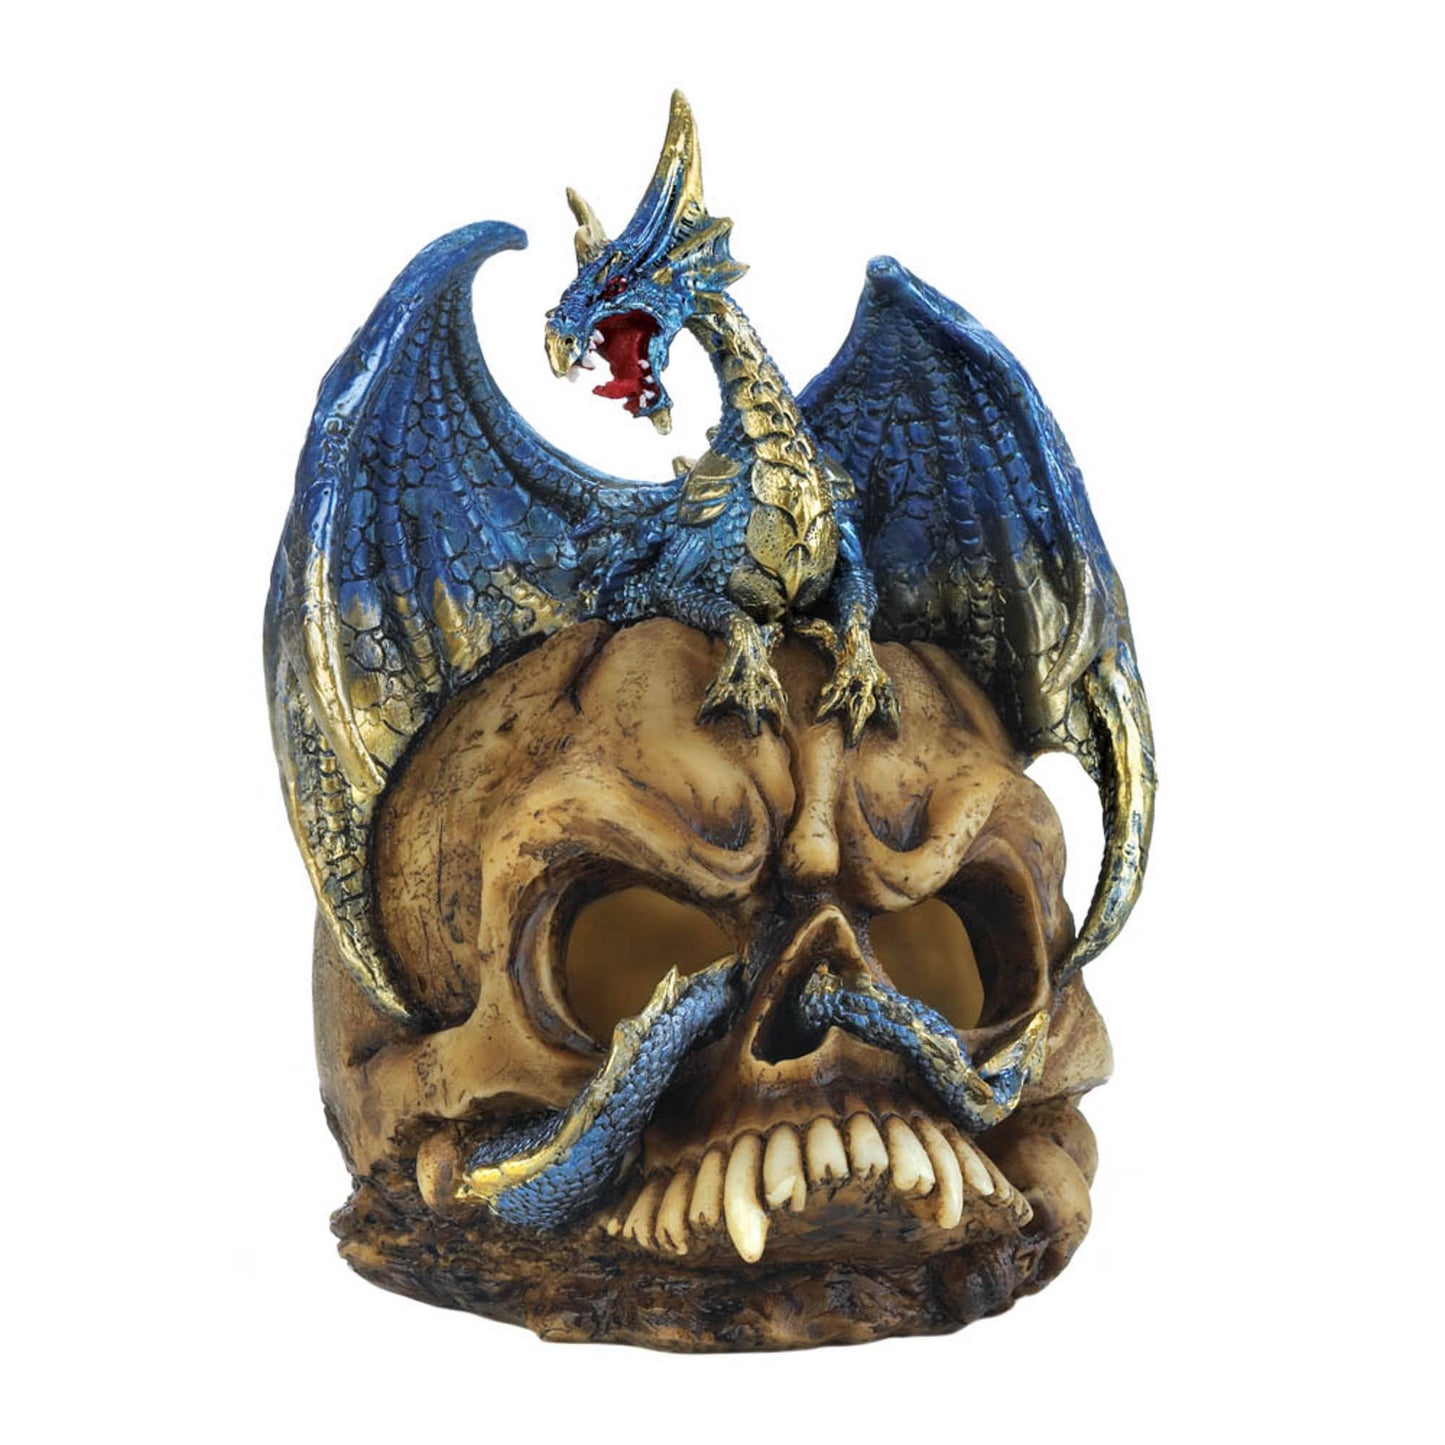 Zingz & Thingz - Blue Dragon and Skull Statue